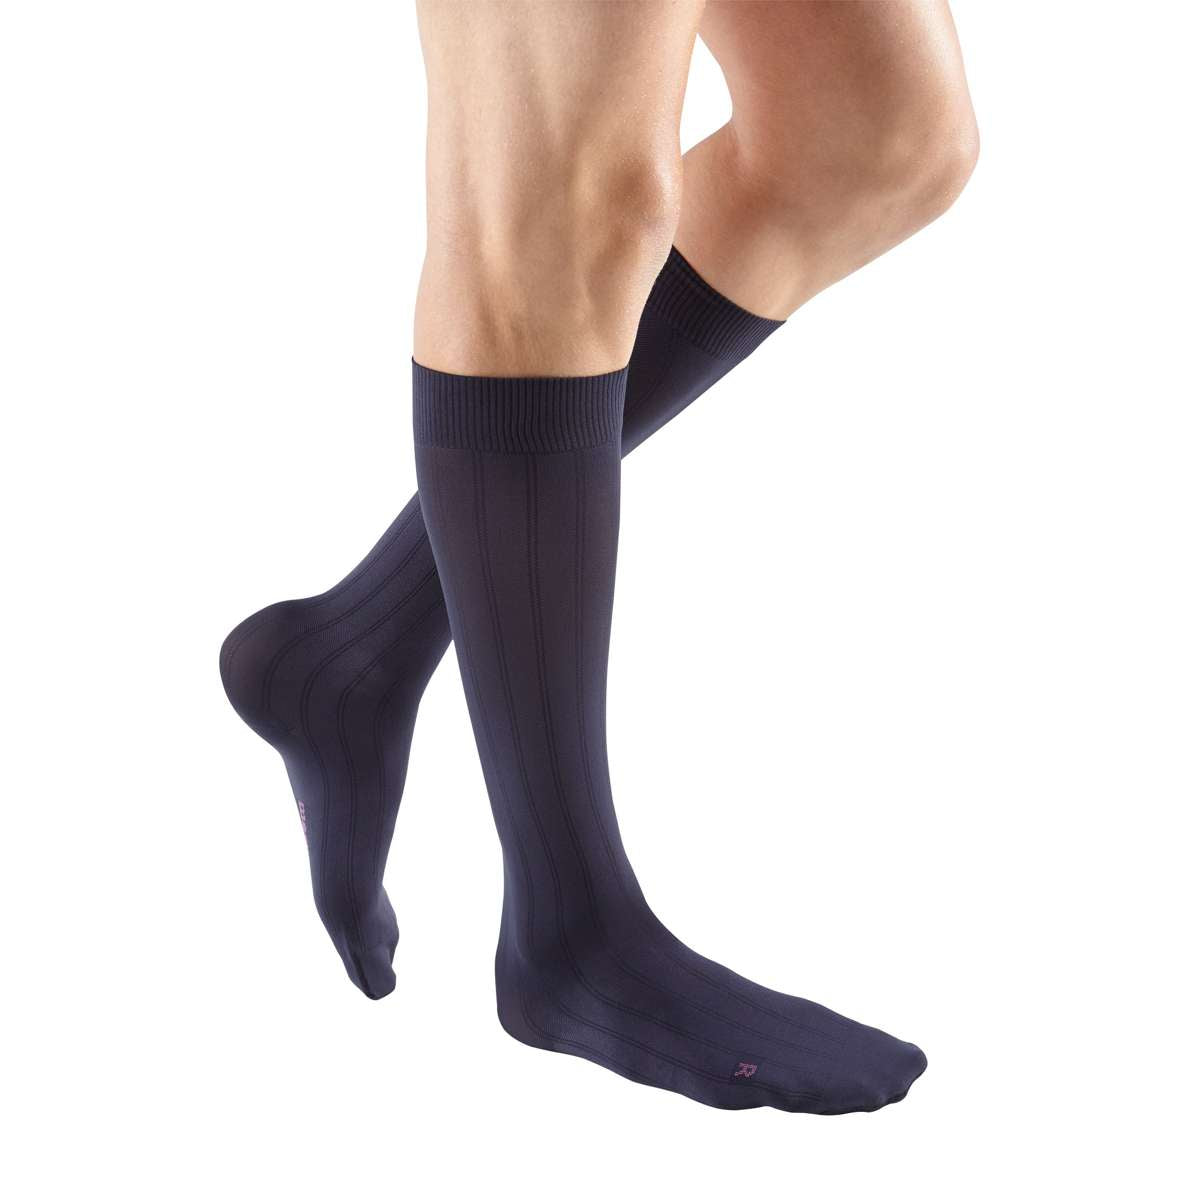 mediven for men classic 15-20 mmHg Calf High Closed Toe Compression Stockings (Tall Length)